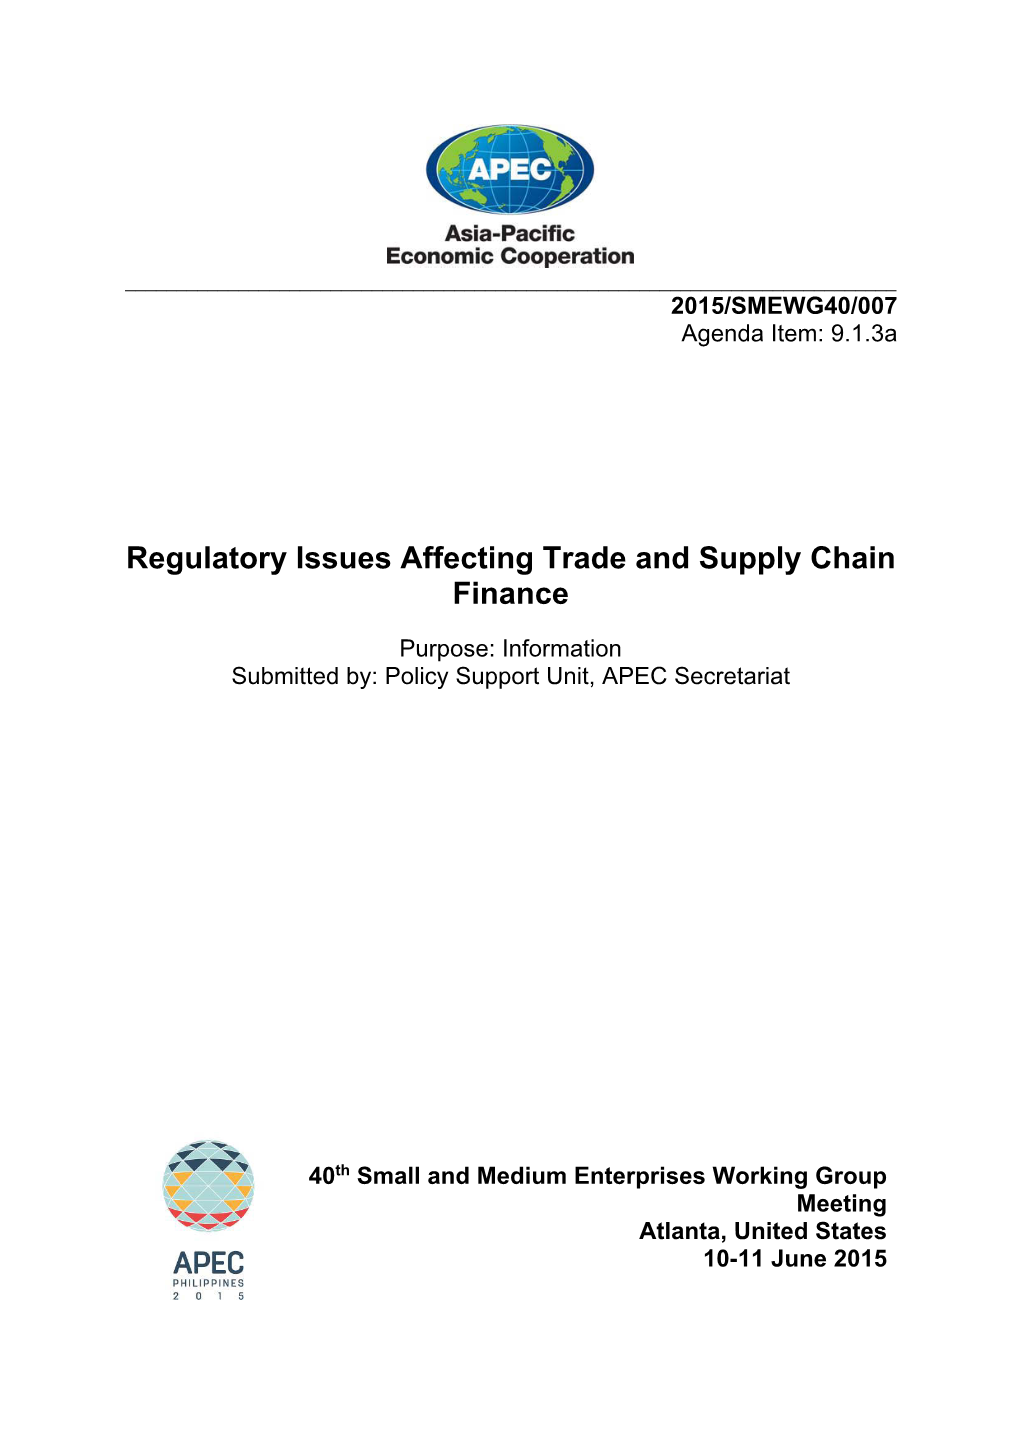 Regulatory Issues Affecting Trade and Supply Chain Finance